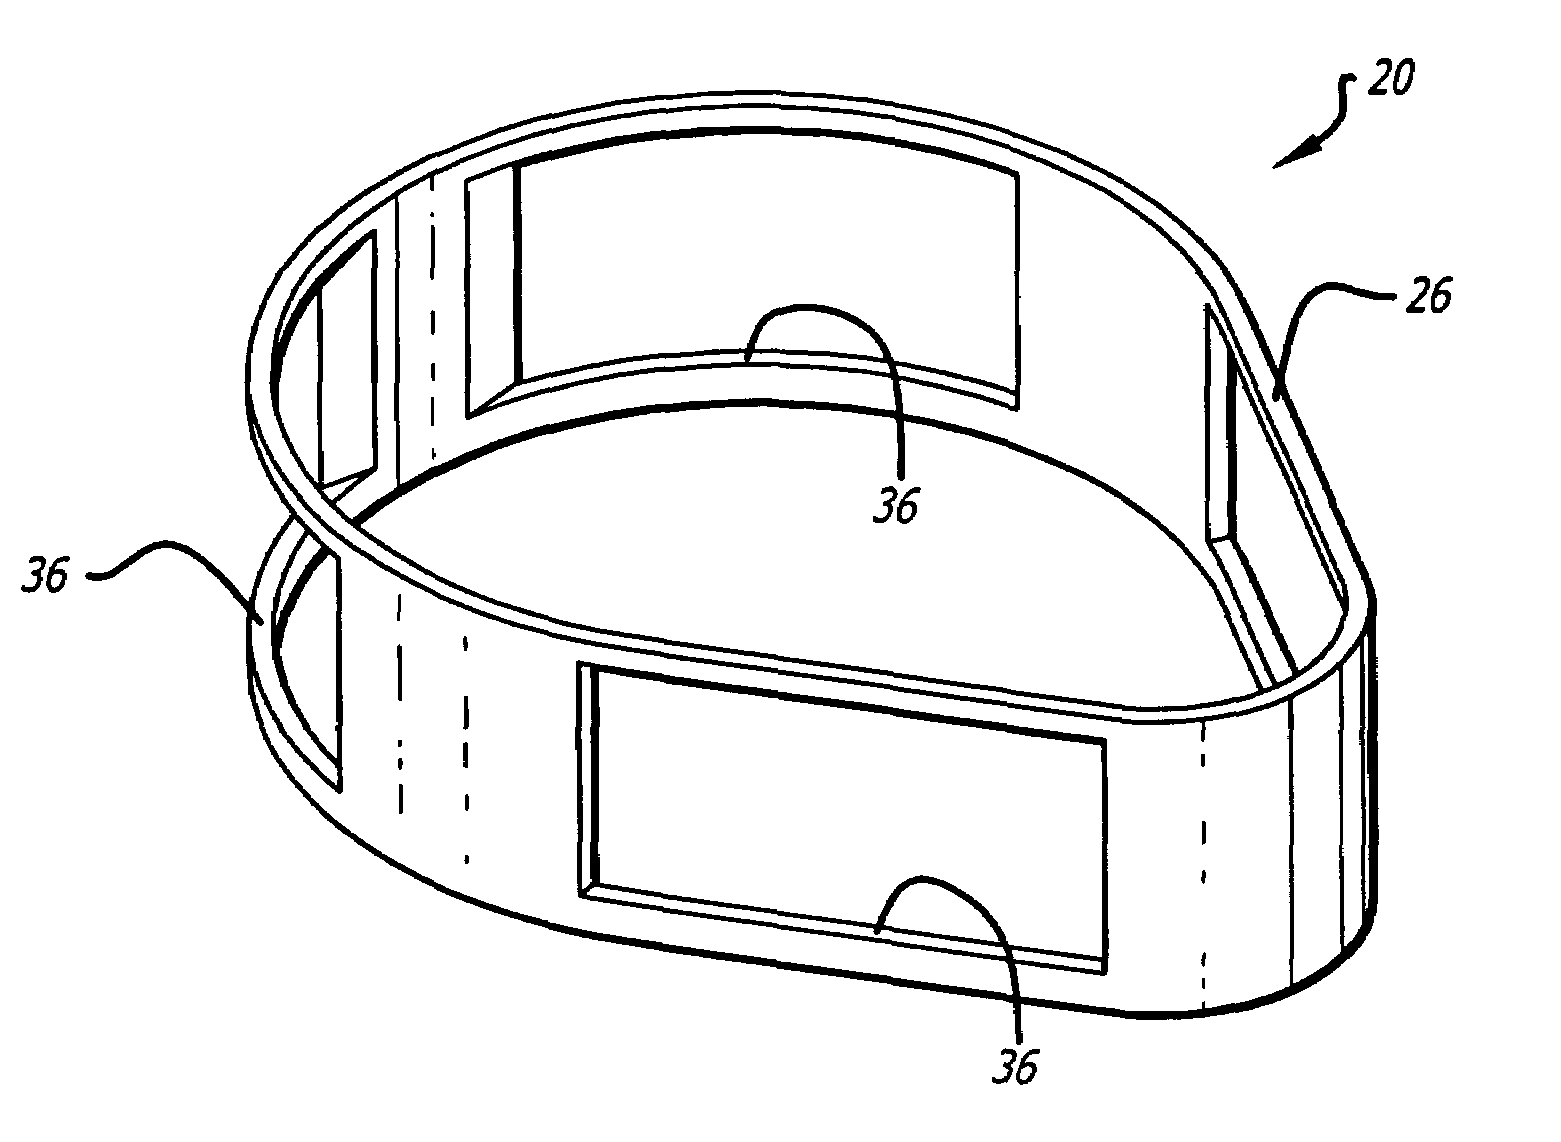 Wok support ring and devices for imparting a rocking motion to a wok